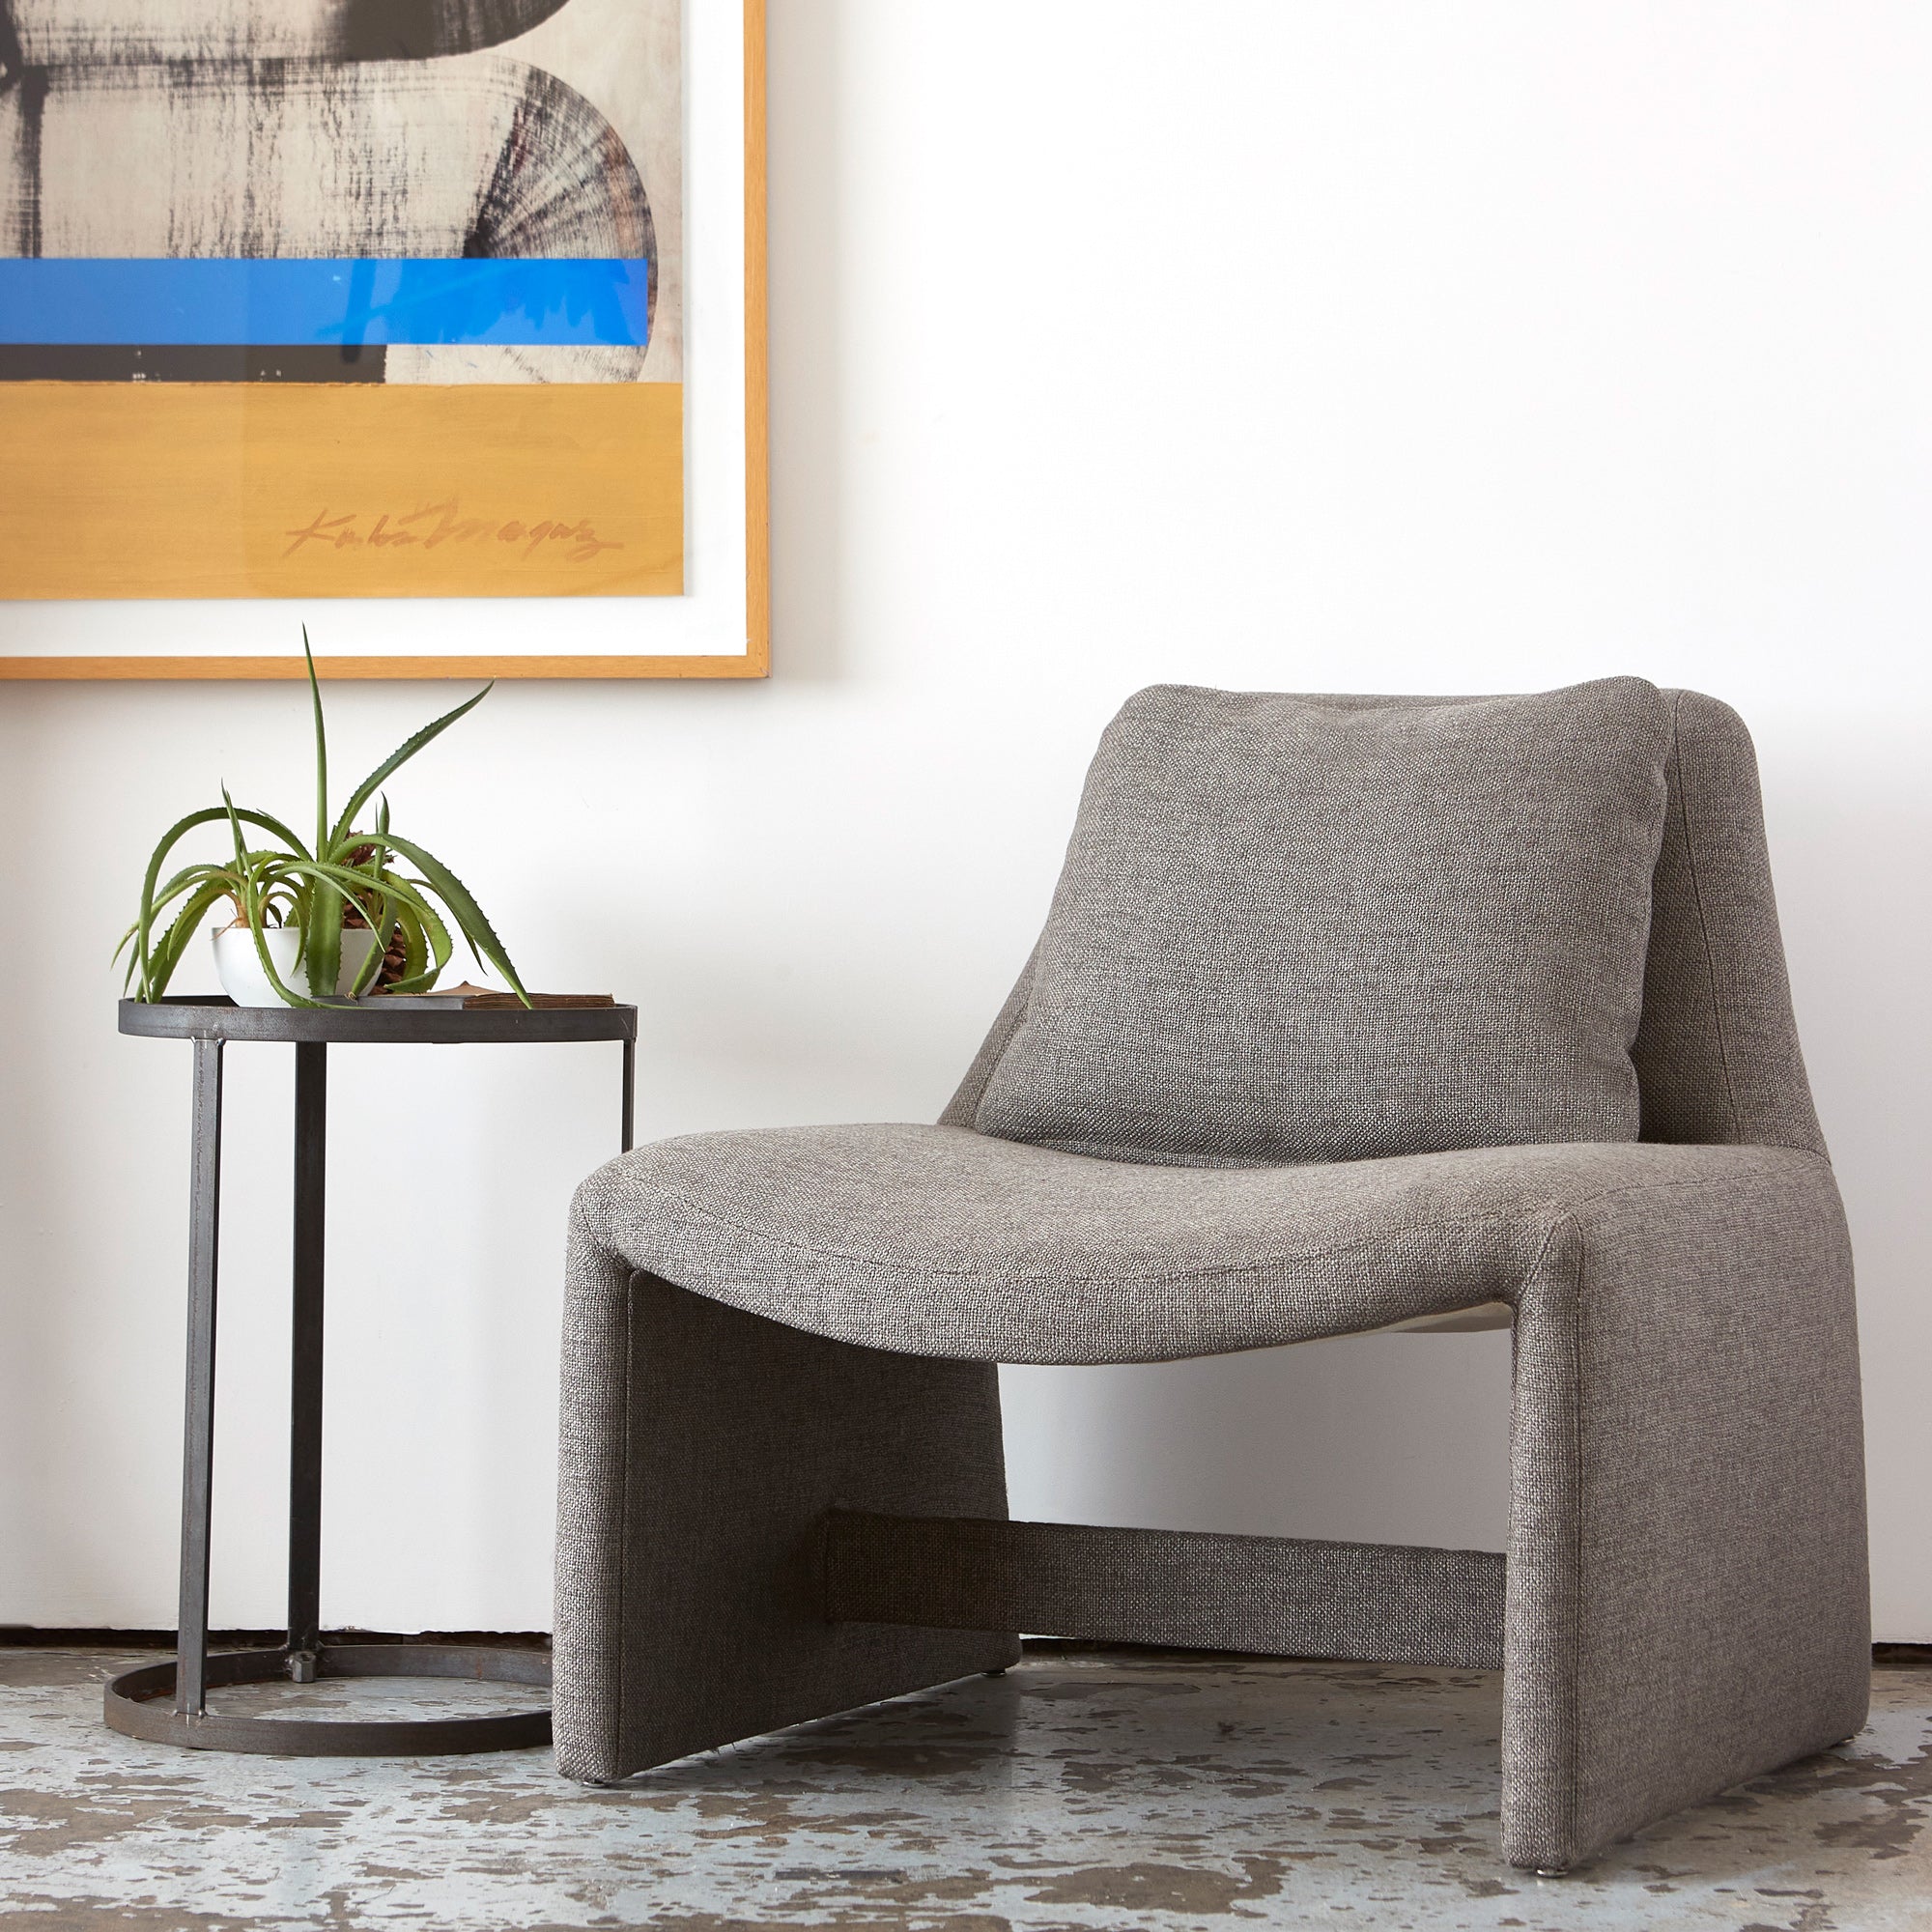  Chair in grey fabric next to a side table with a plant. 